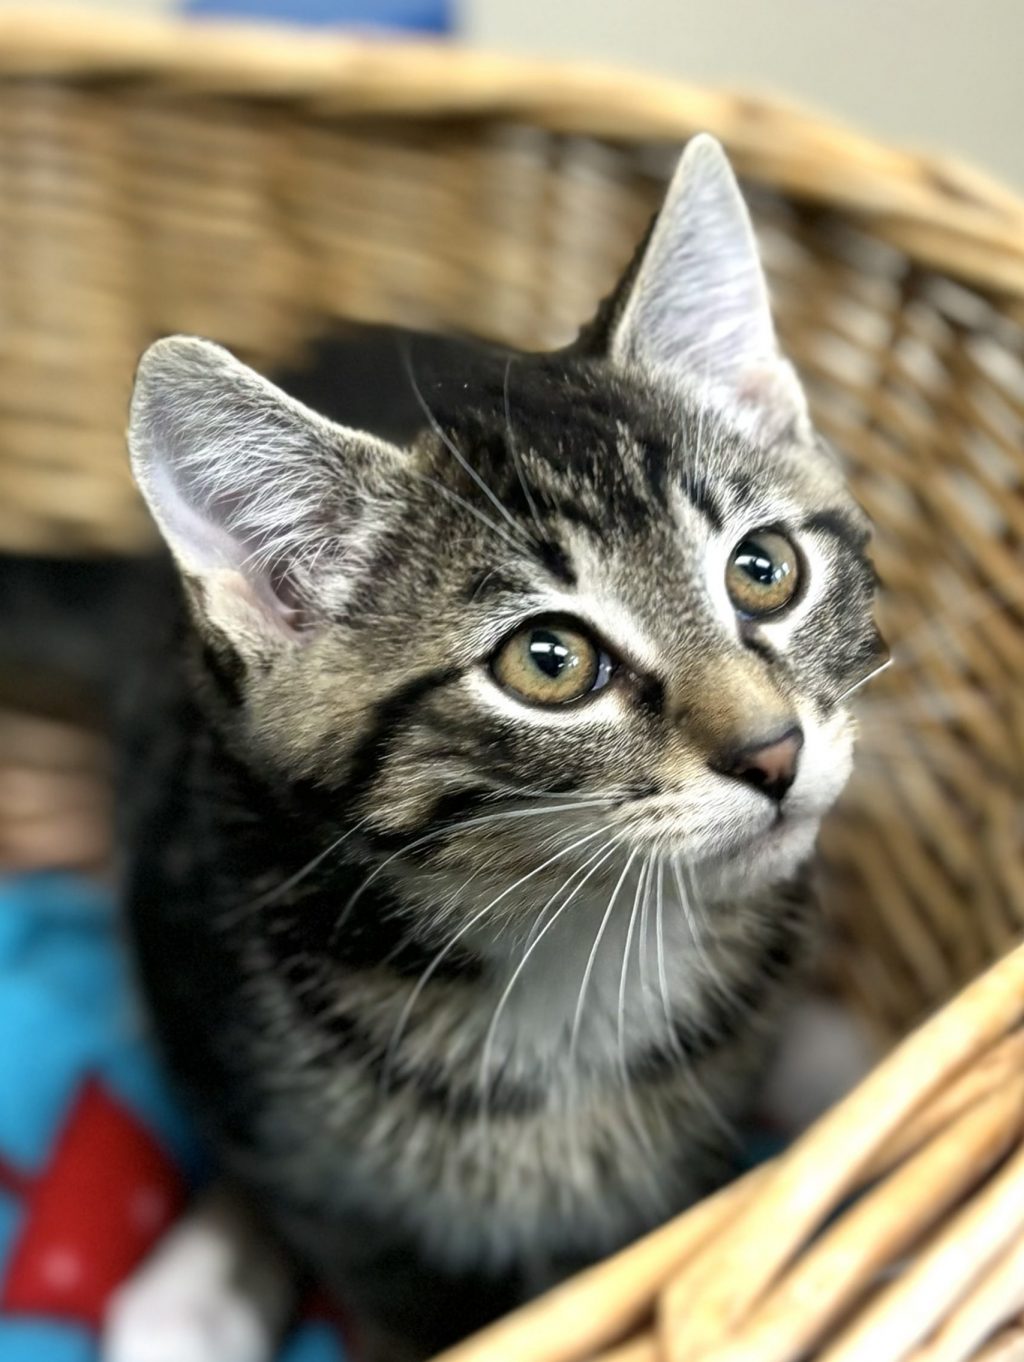 Born April 23, 2024 meet Gucci! Gucci is a very calm kitten who loves to get attention or nap! He gets along great with other cats but hasn't met any dogs. He loves to play with other kitties especially if a cat tail is involved or a laser! Gucci is available for adoption, come meet this sweet guy!